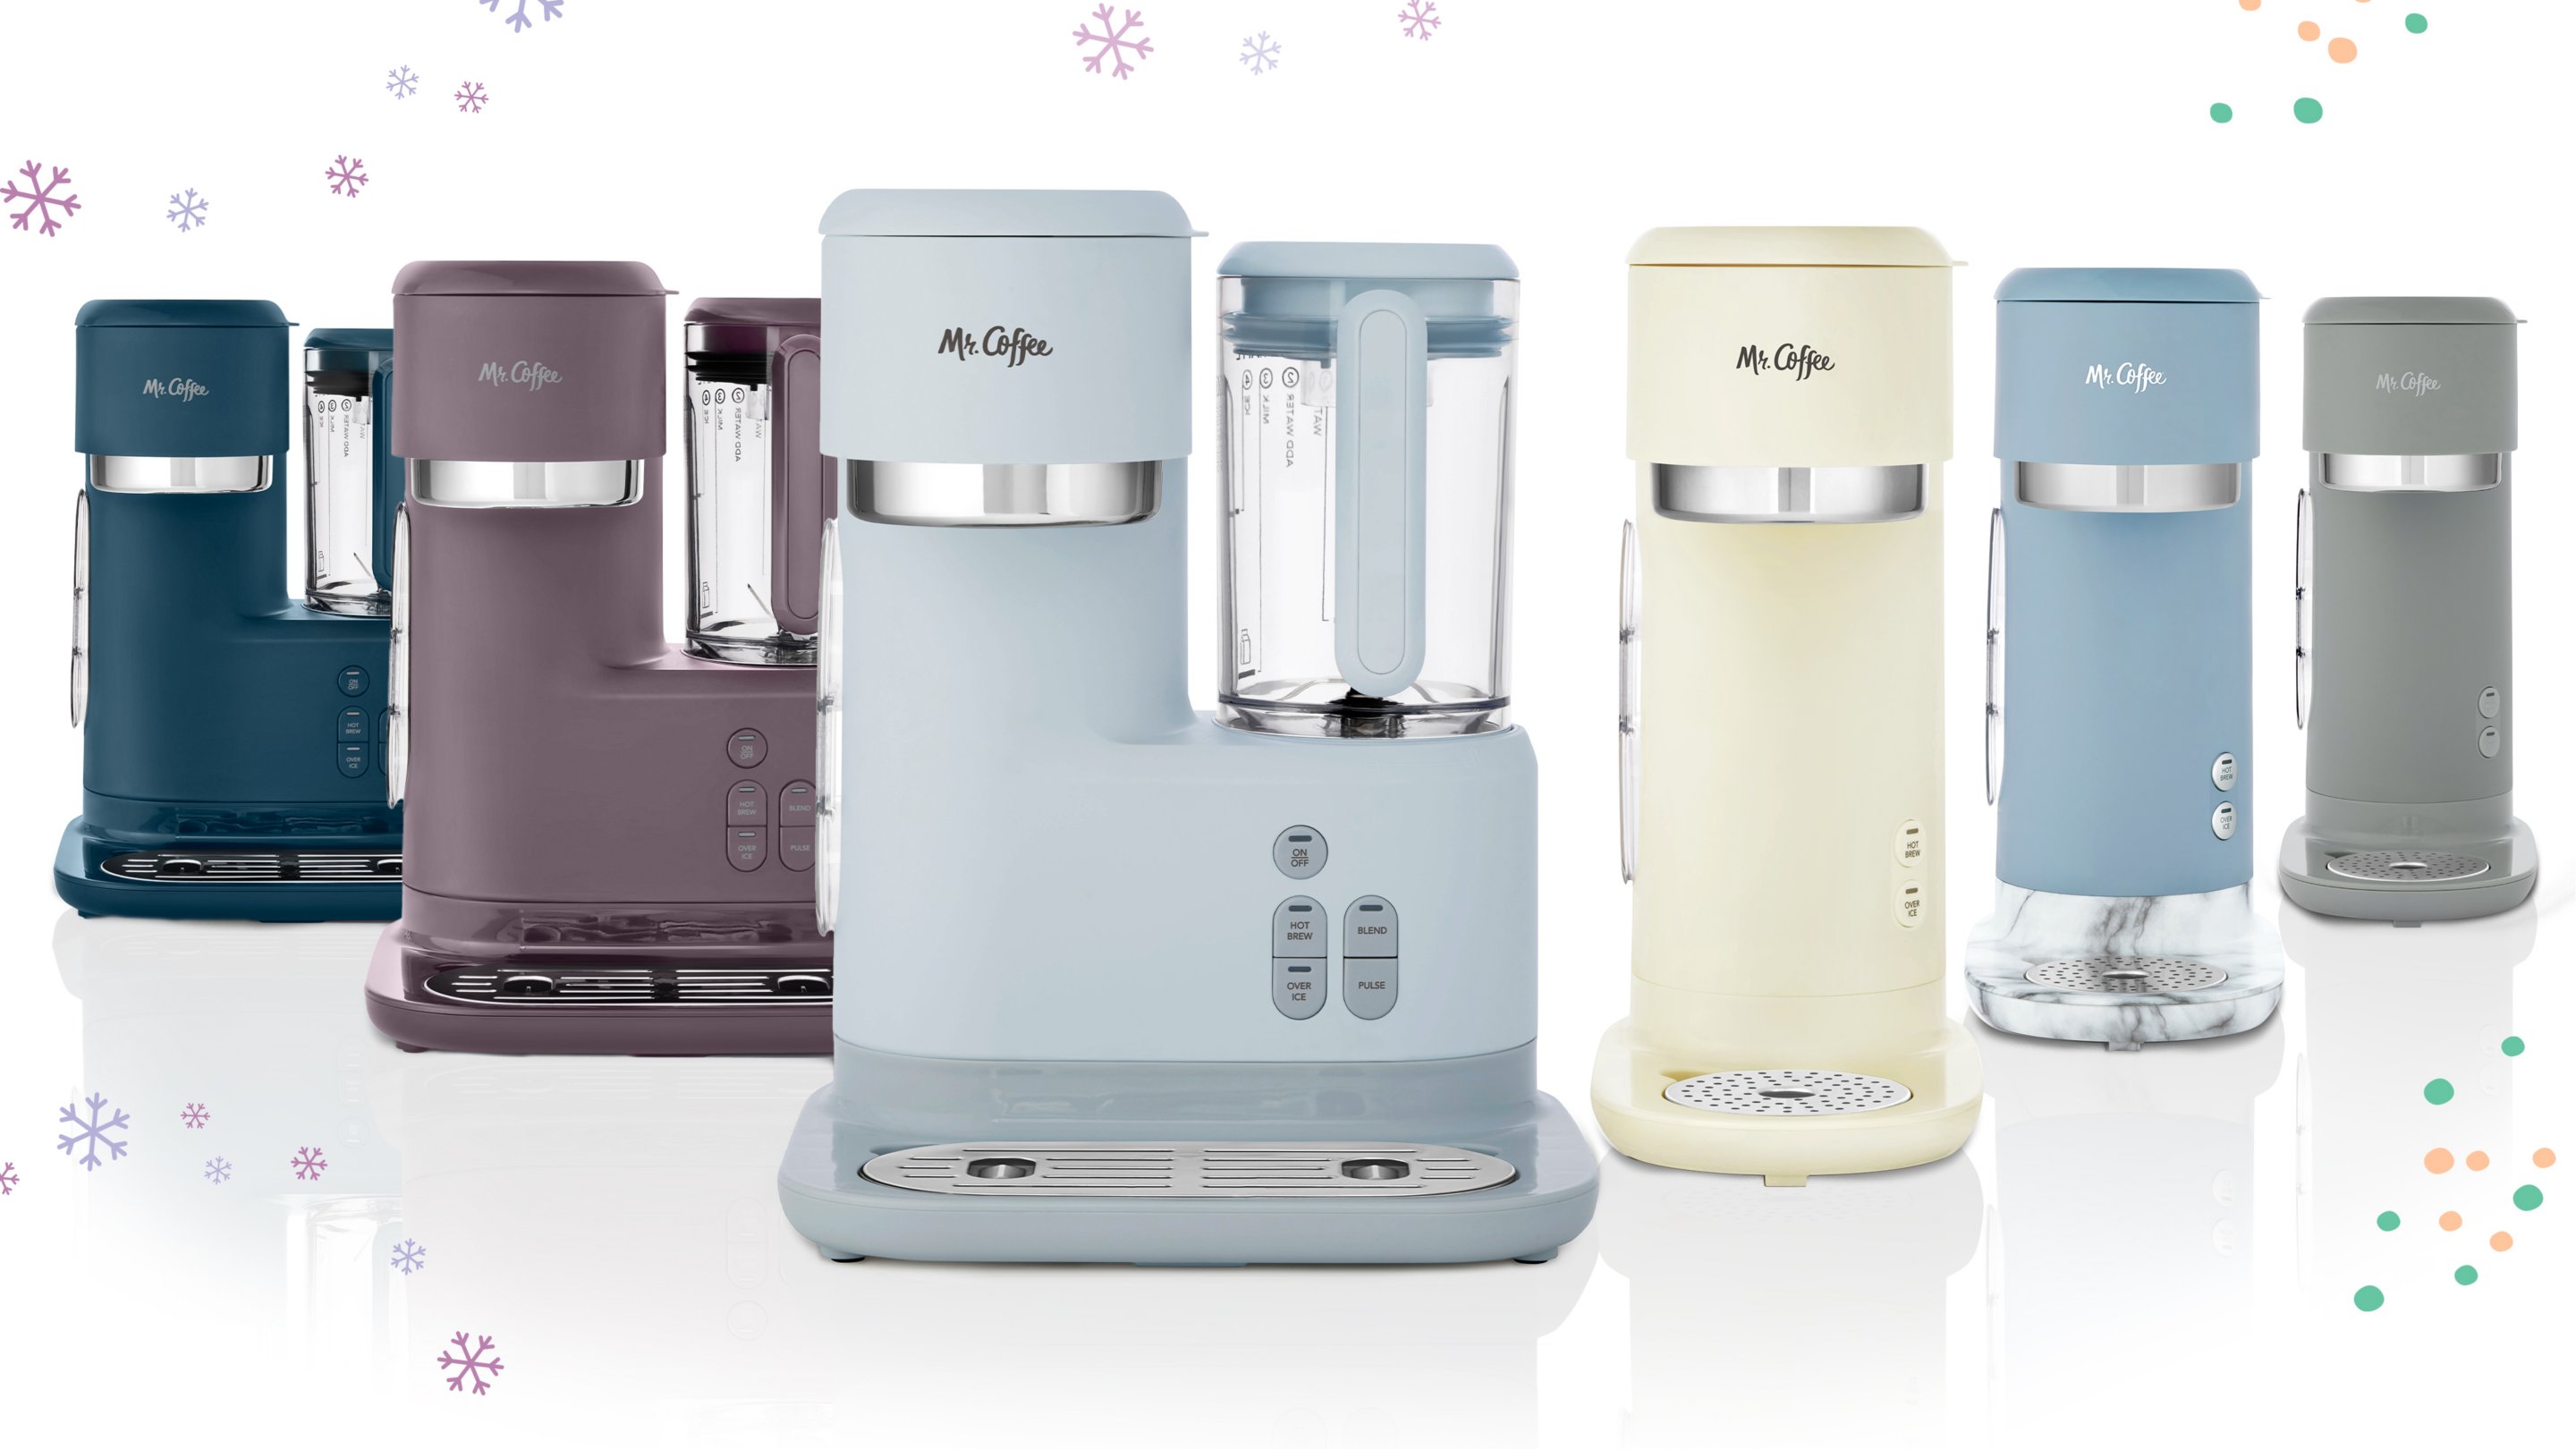 Colorful lineup of mr. coffee coffeemakers